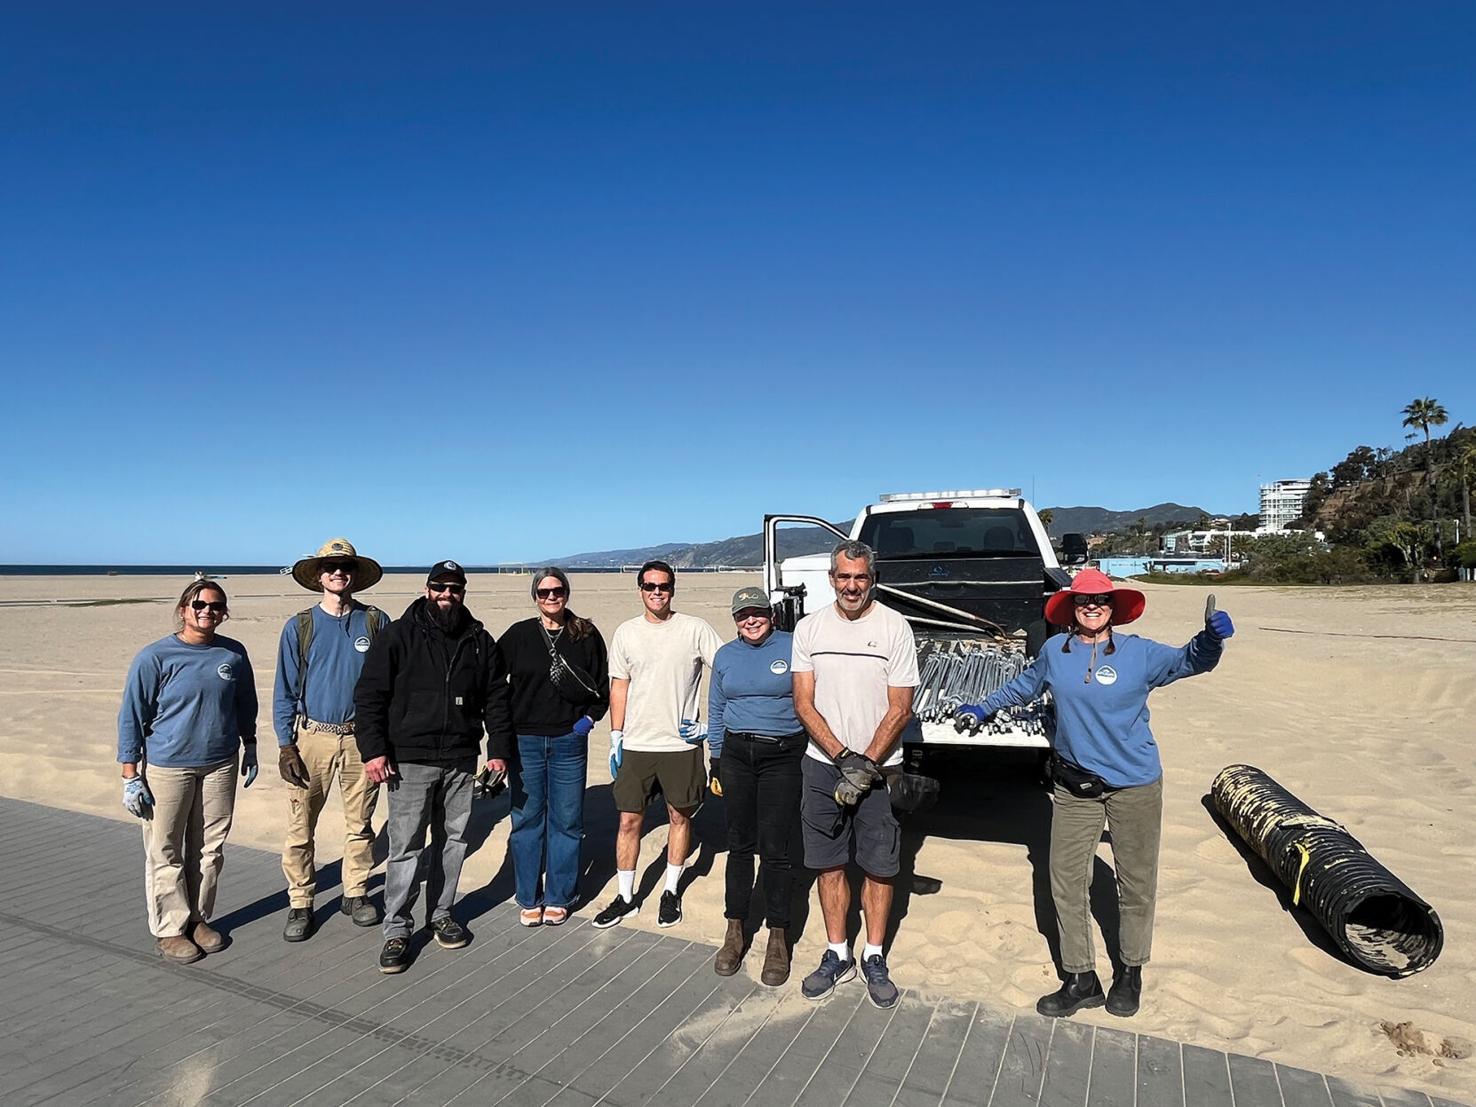 Members of The Bay Foundation, the sustainability sector of the city of Santa Monica and Santa Monica’s Beach Maintenance Crew joined together on March 14 to start a second dune restoration project after a six-year pilot project proved successfully implemented.